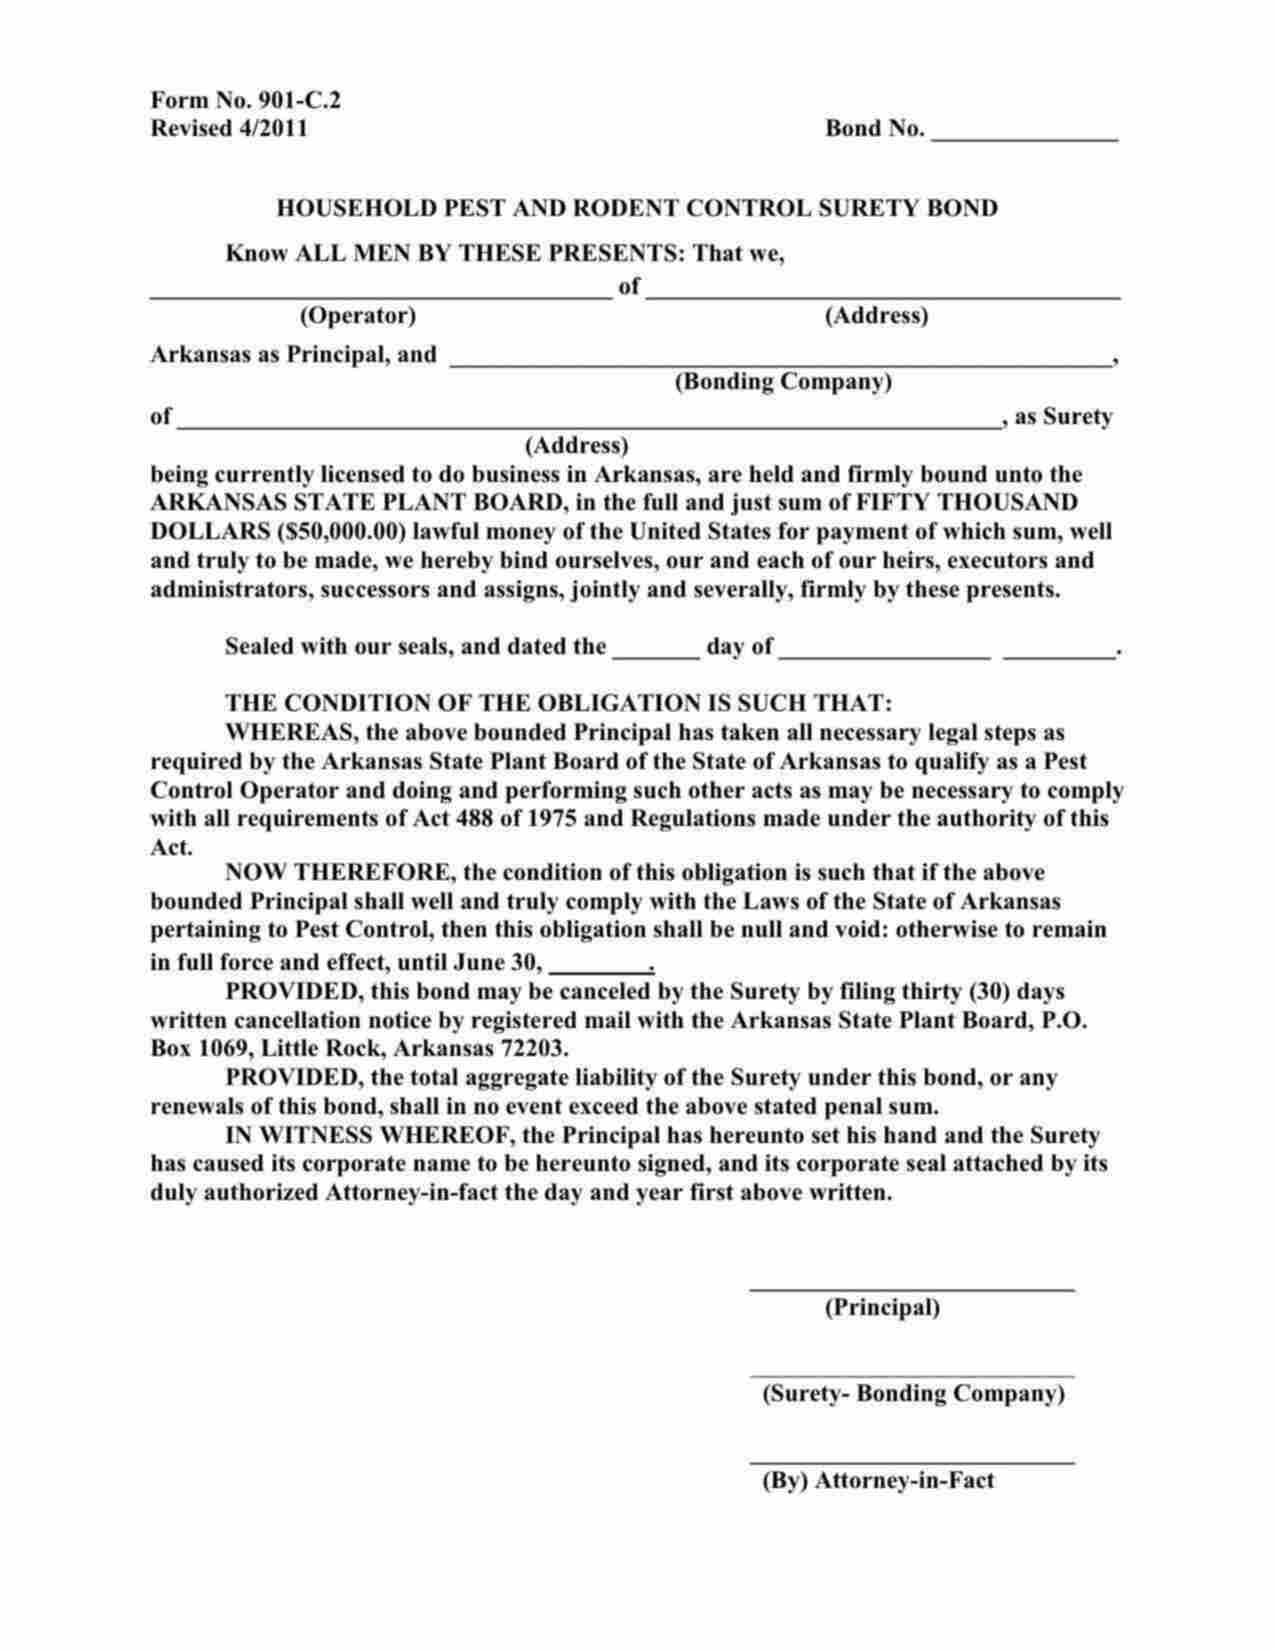 Arkansas Household Pest and Rodent Control Bond Form